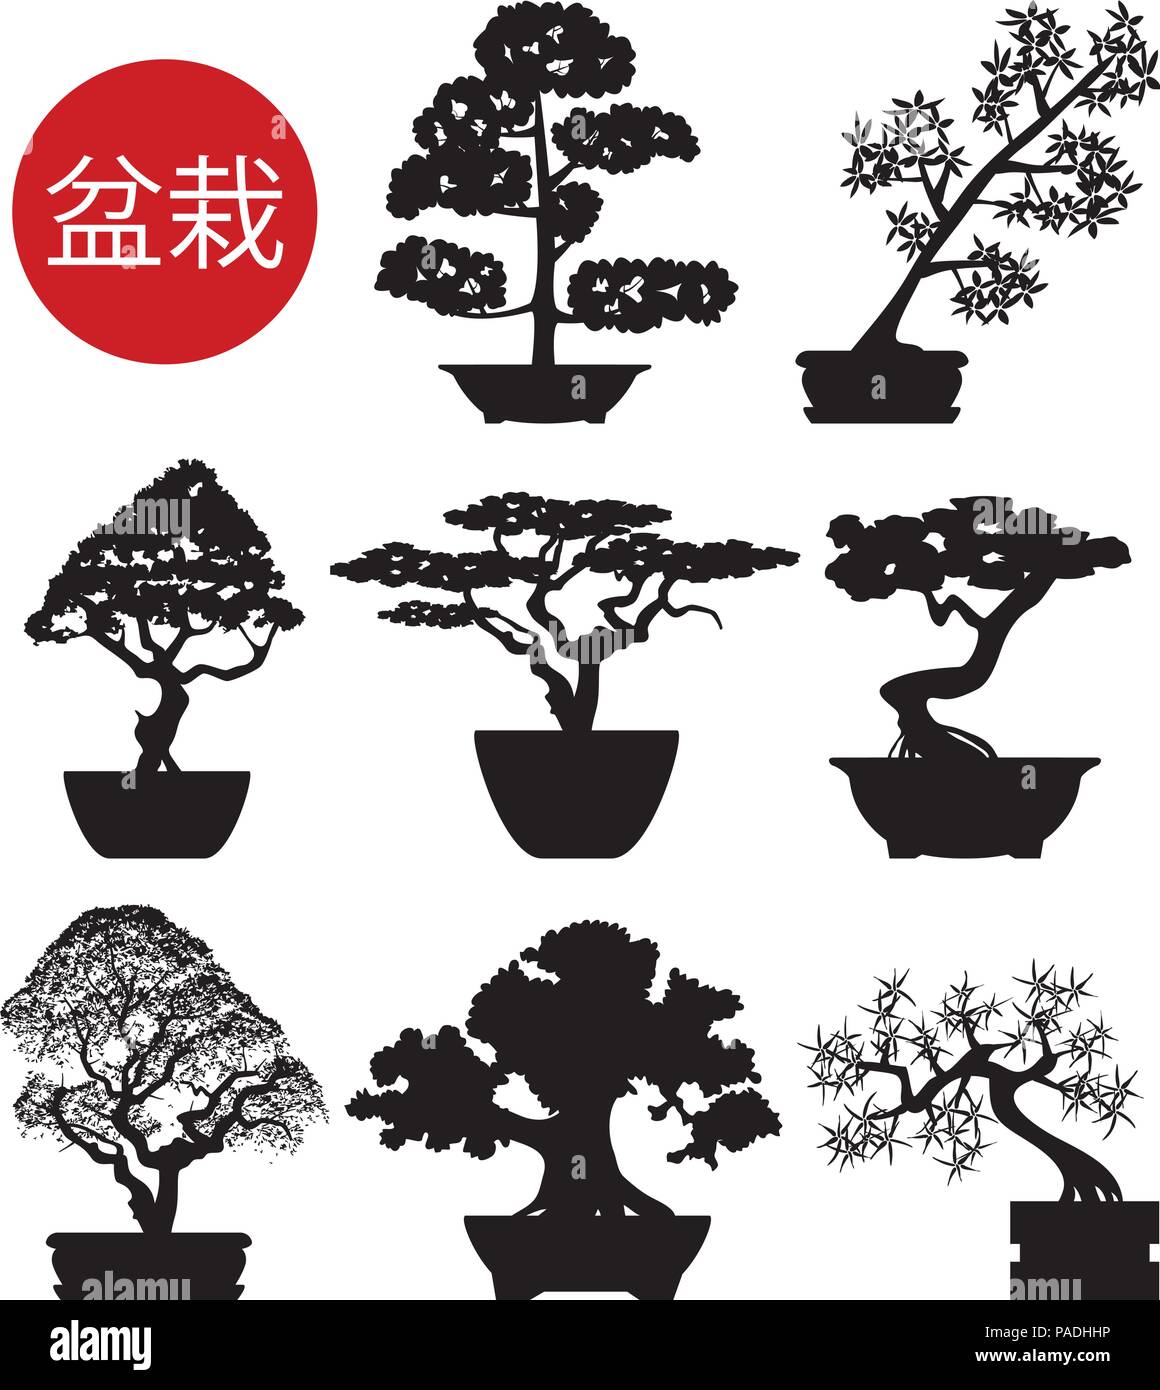 vector set of black and white bonsai trees in pots, background silhouettes Stock Vector